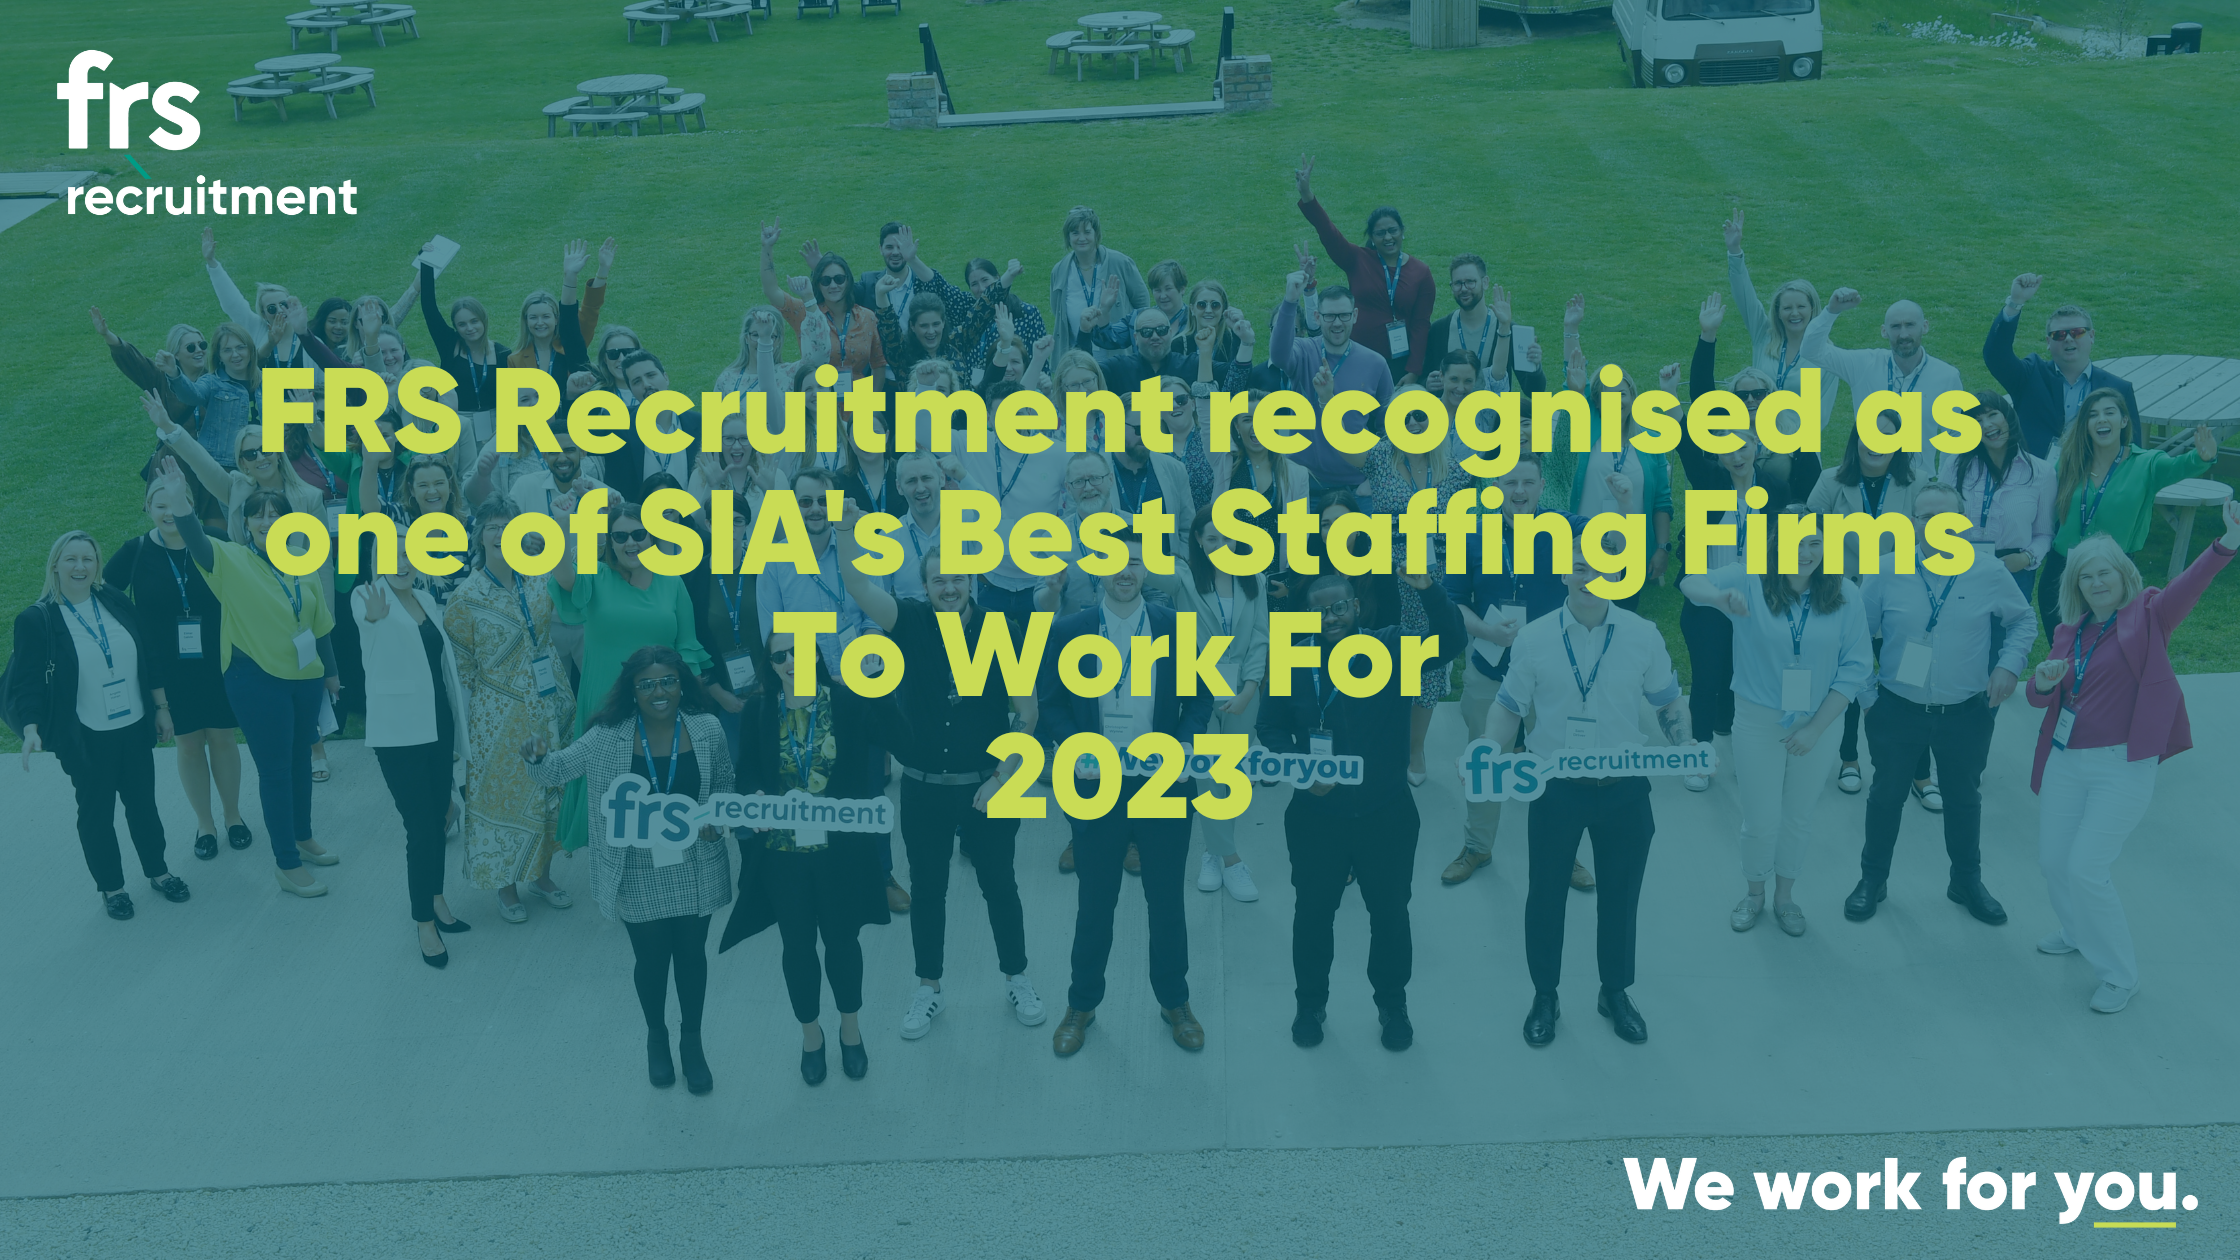 FRS Recruitment recognised as one of SIA's Best Staffing Firms To Work For